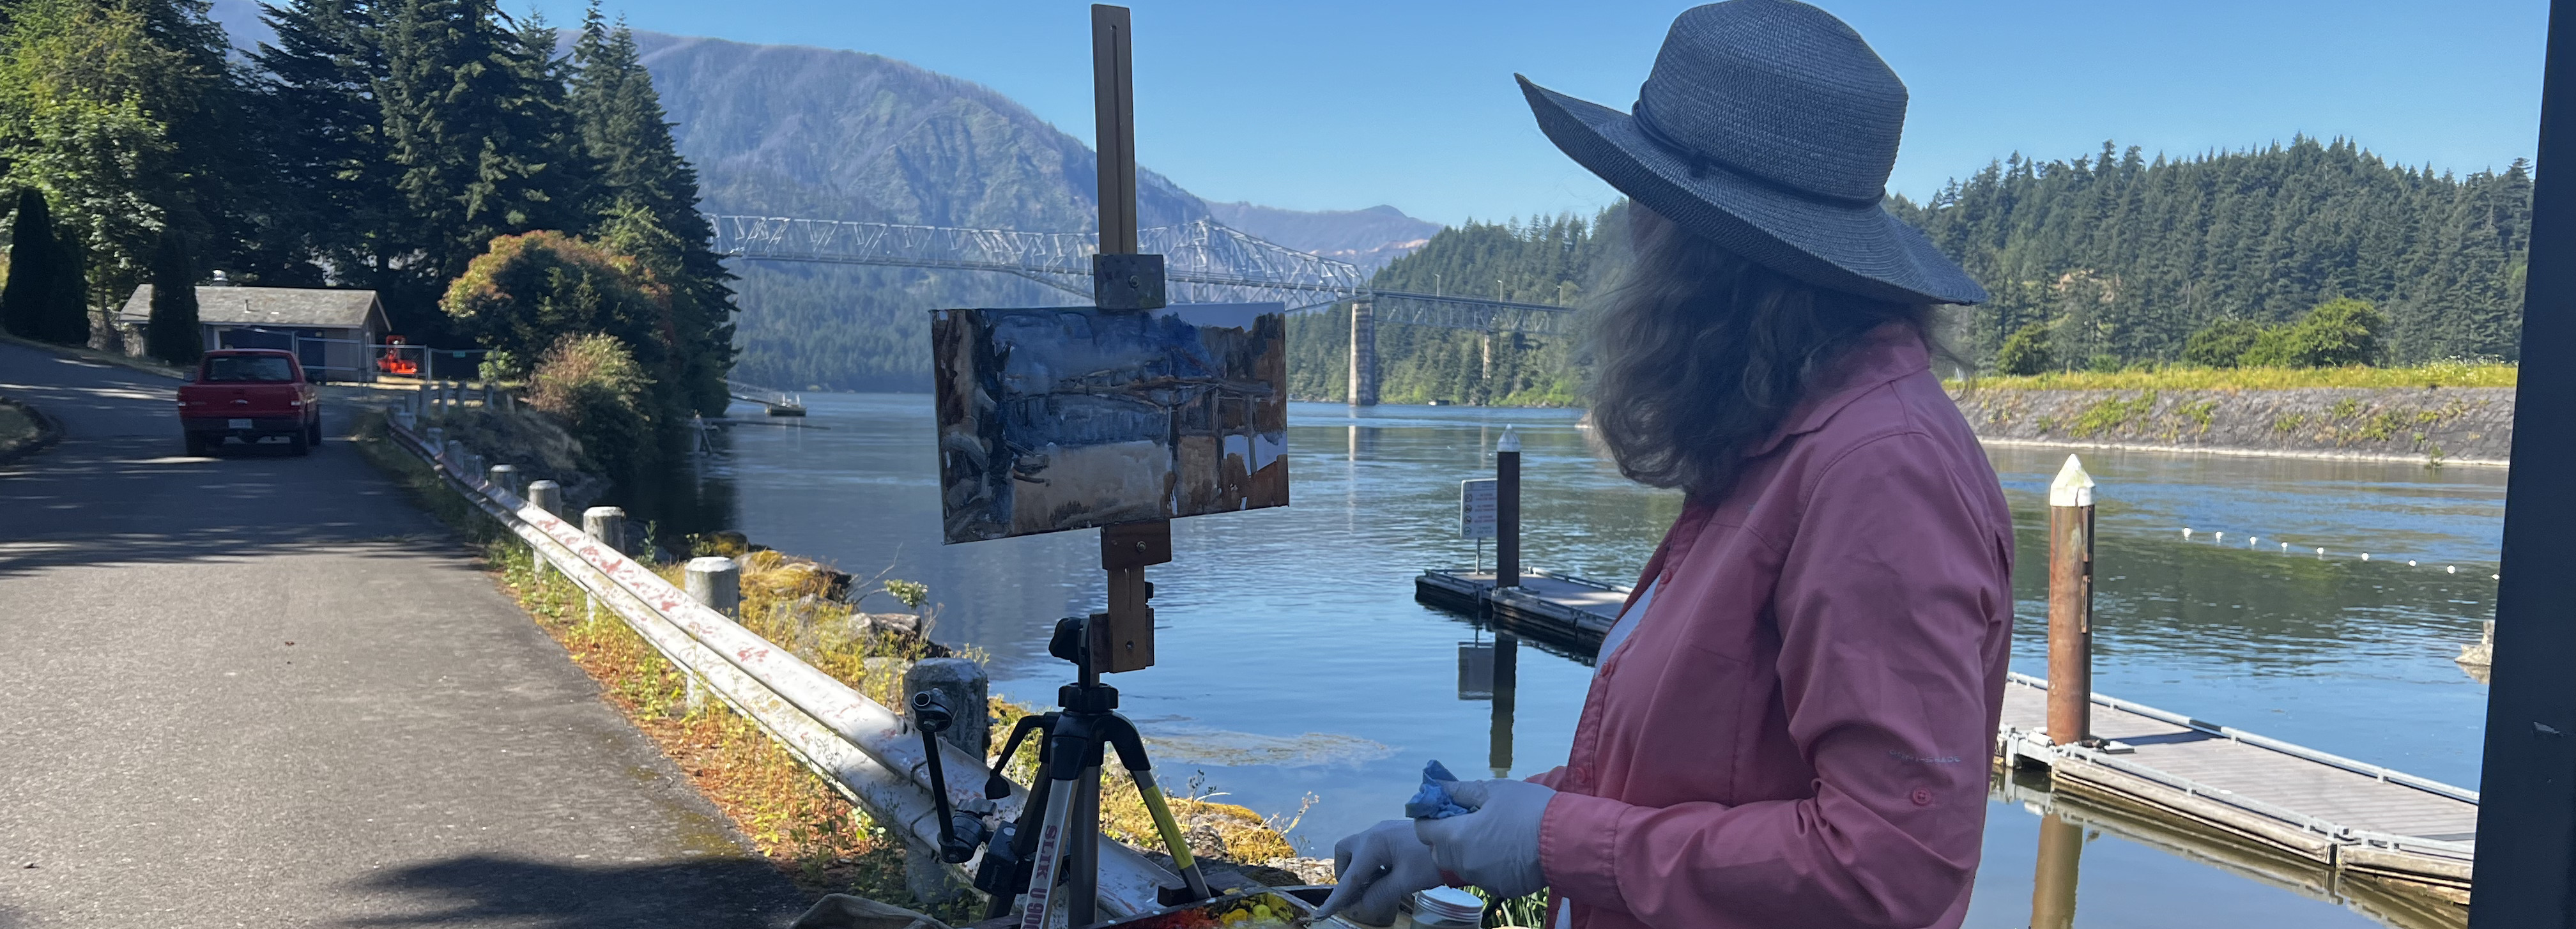 Plein Air 2022: Cultivating a Community of Painters